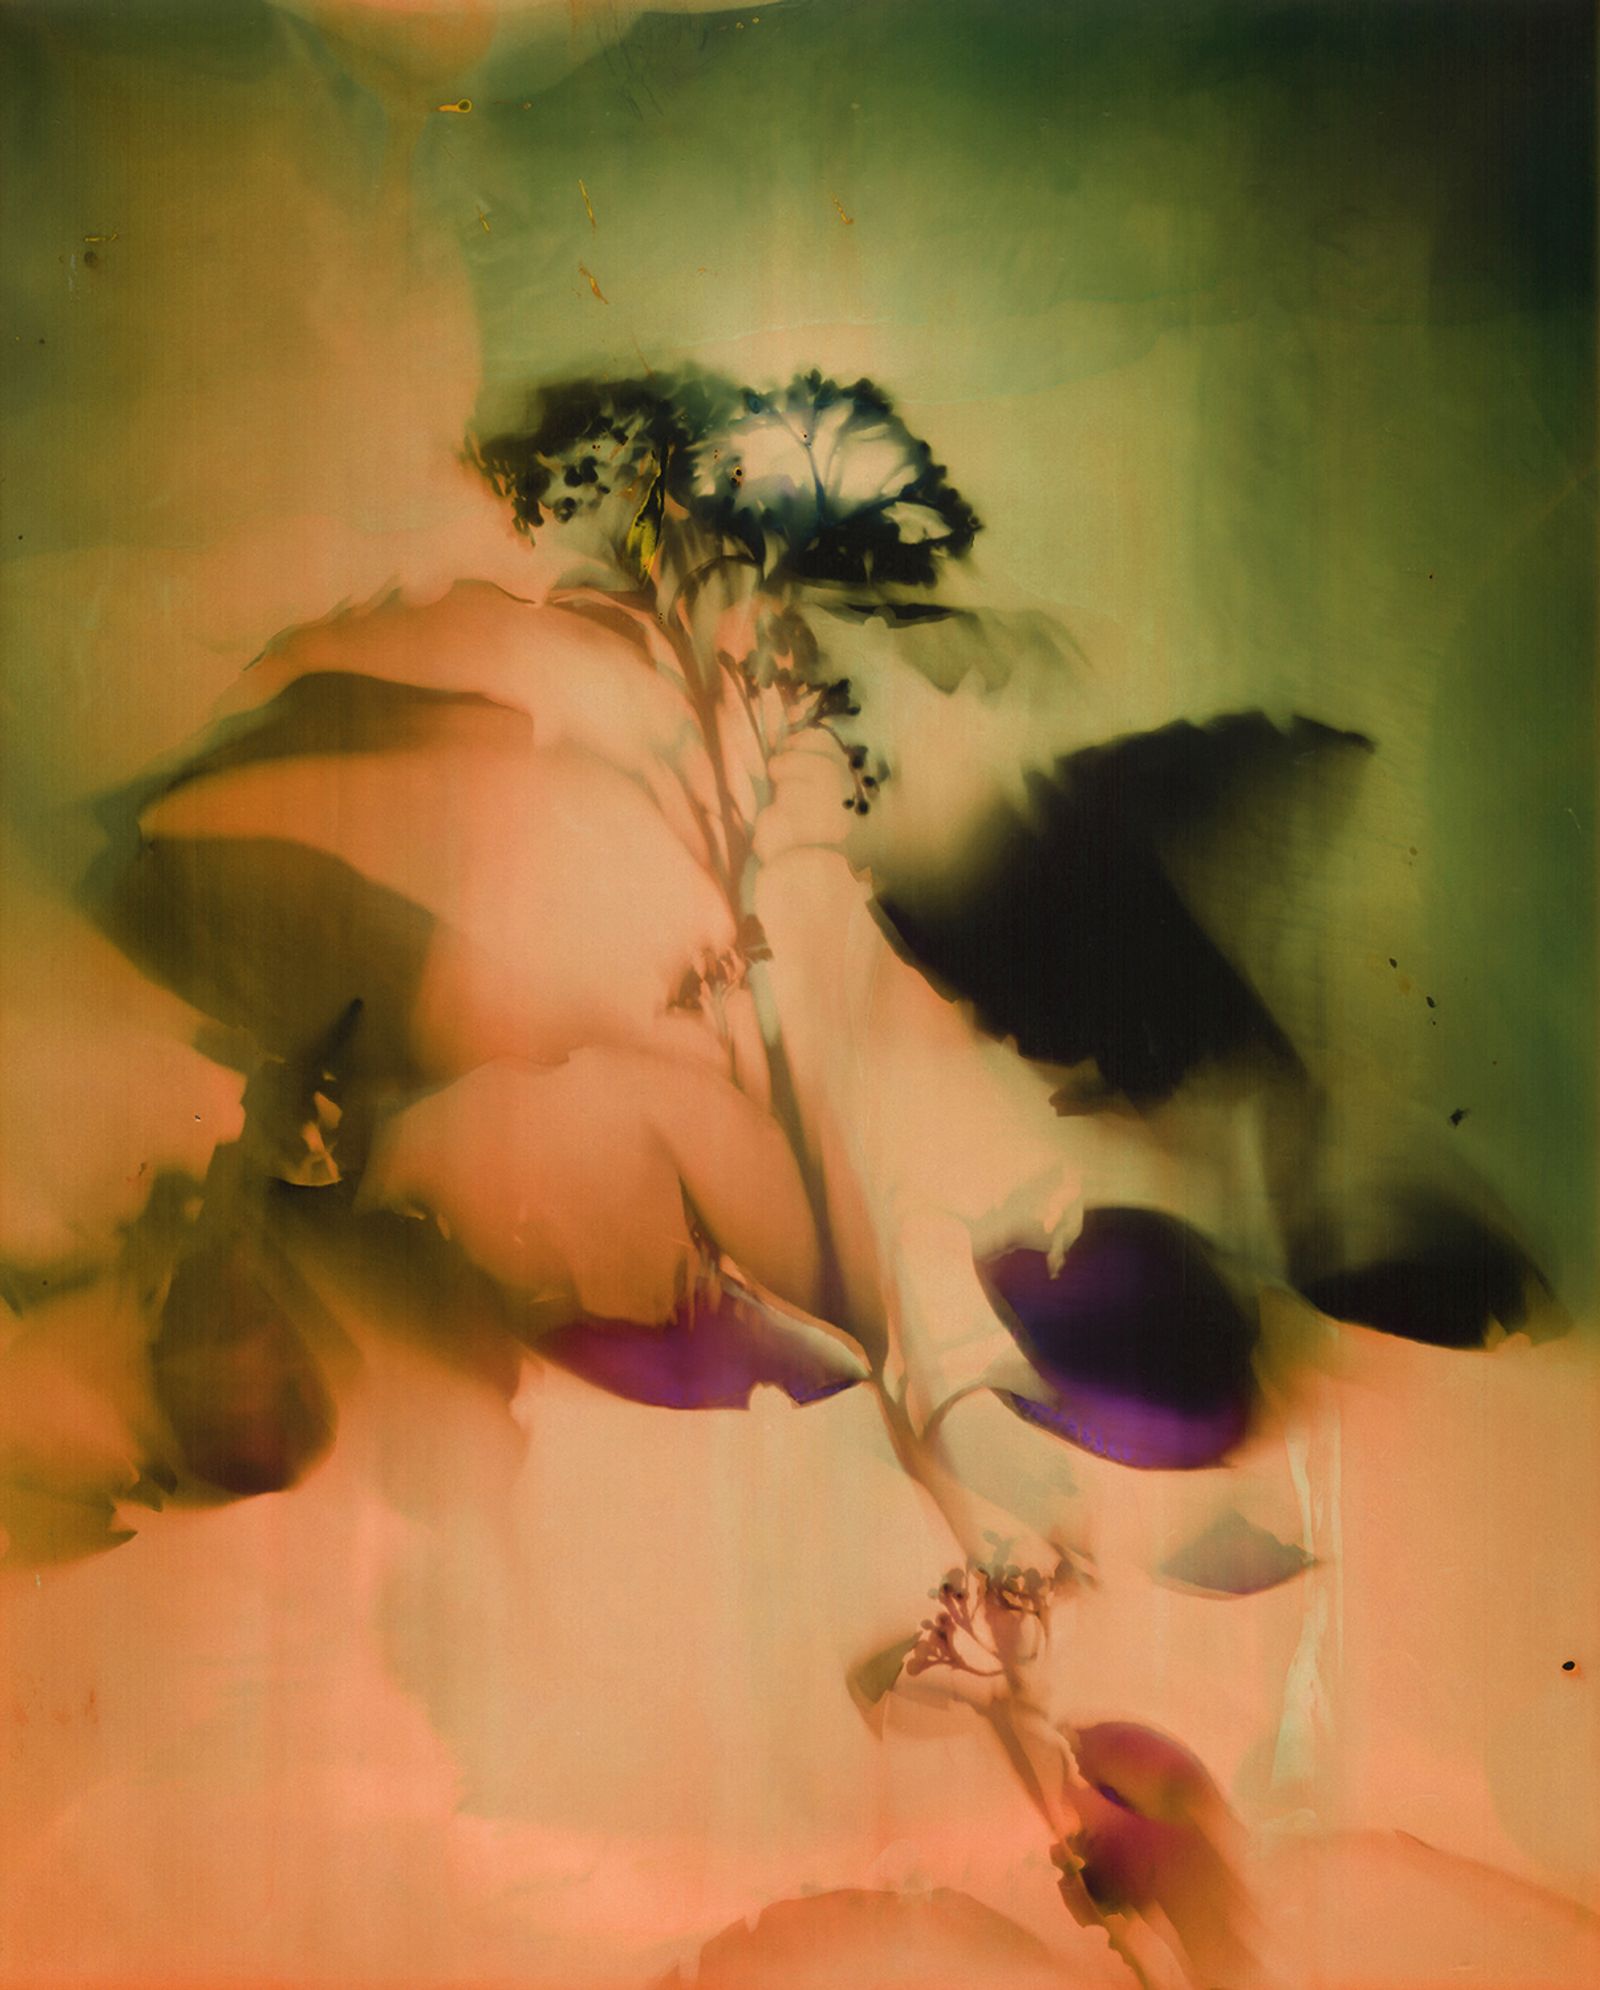 © Christelle Boulé - Image from the Botanica photography project